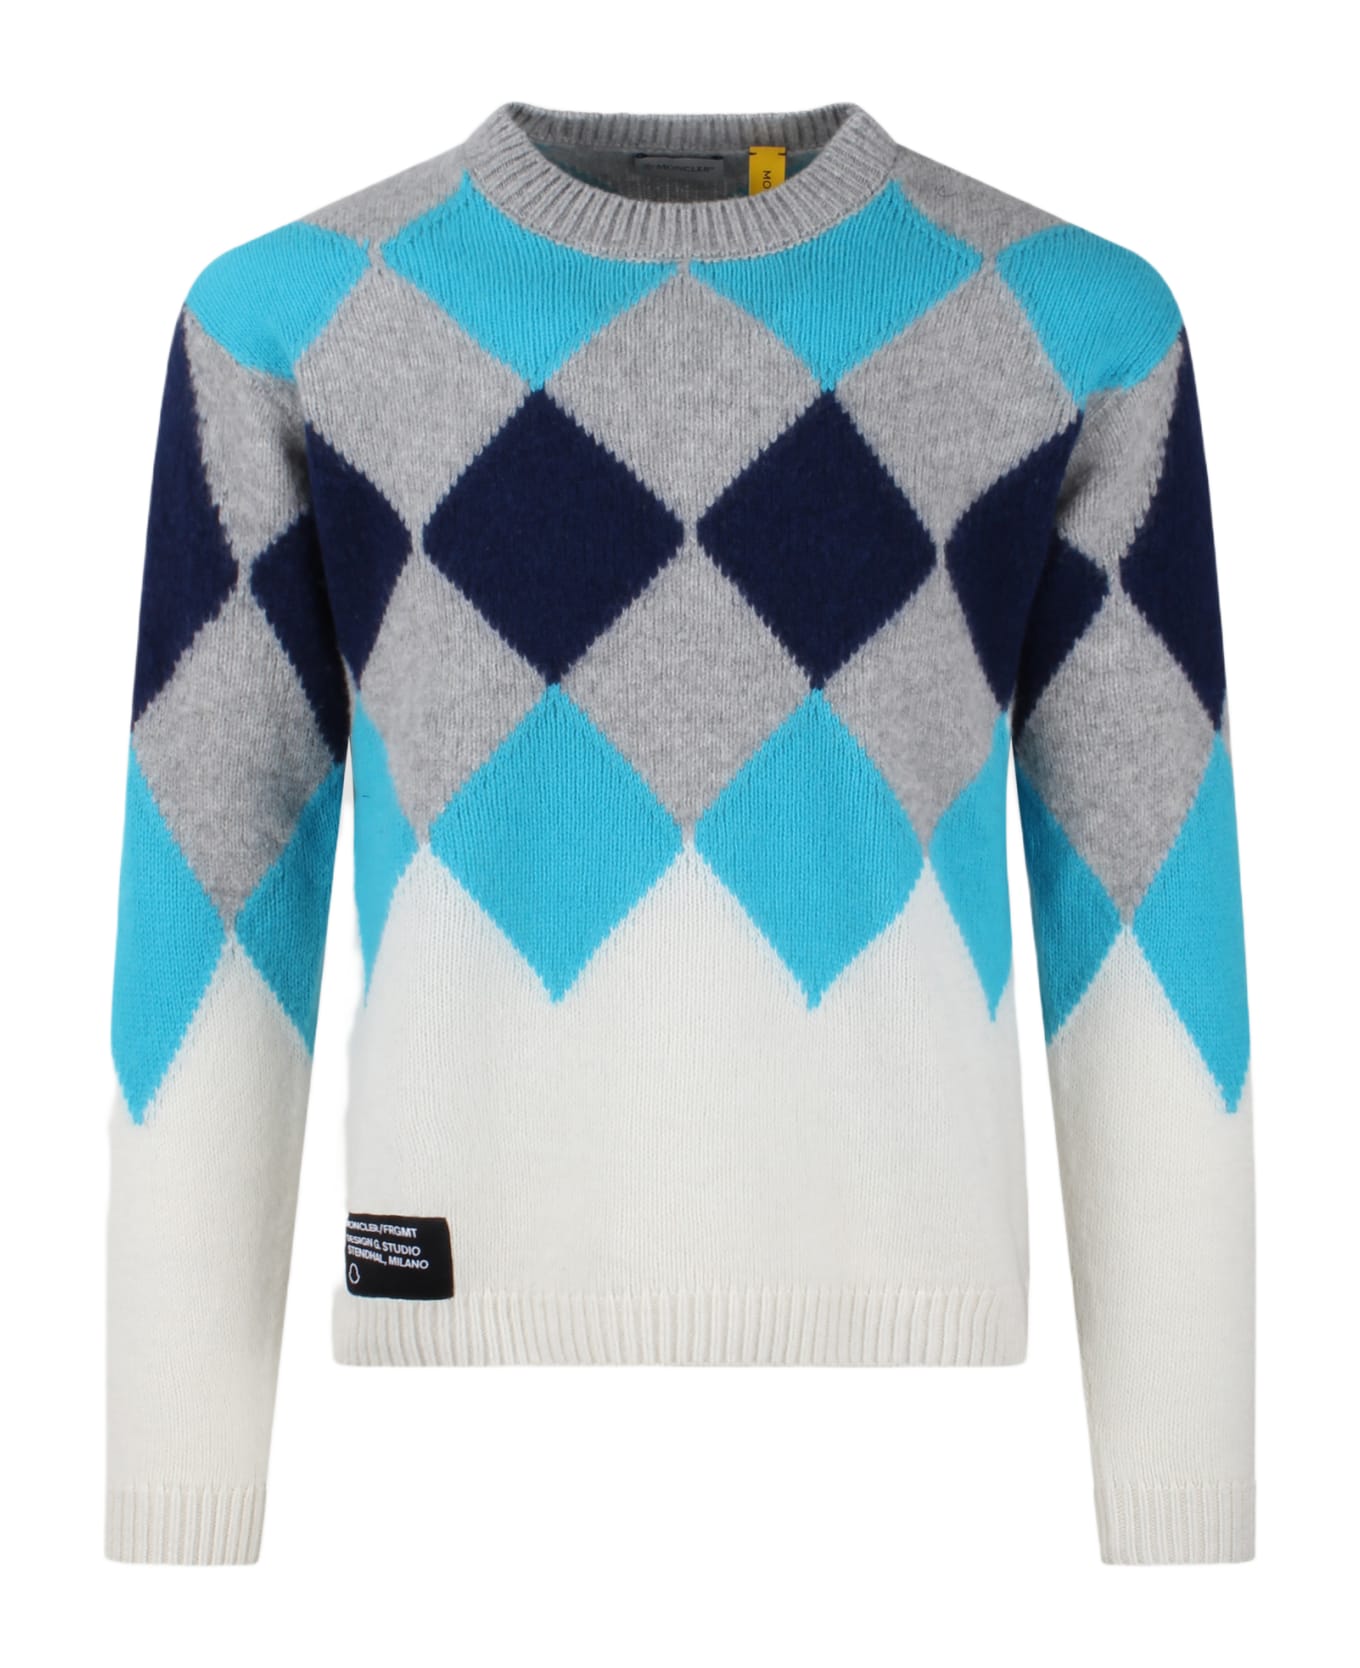 Moncler Genius Wool And Cashmere Crewneck Sweater - Blue